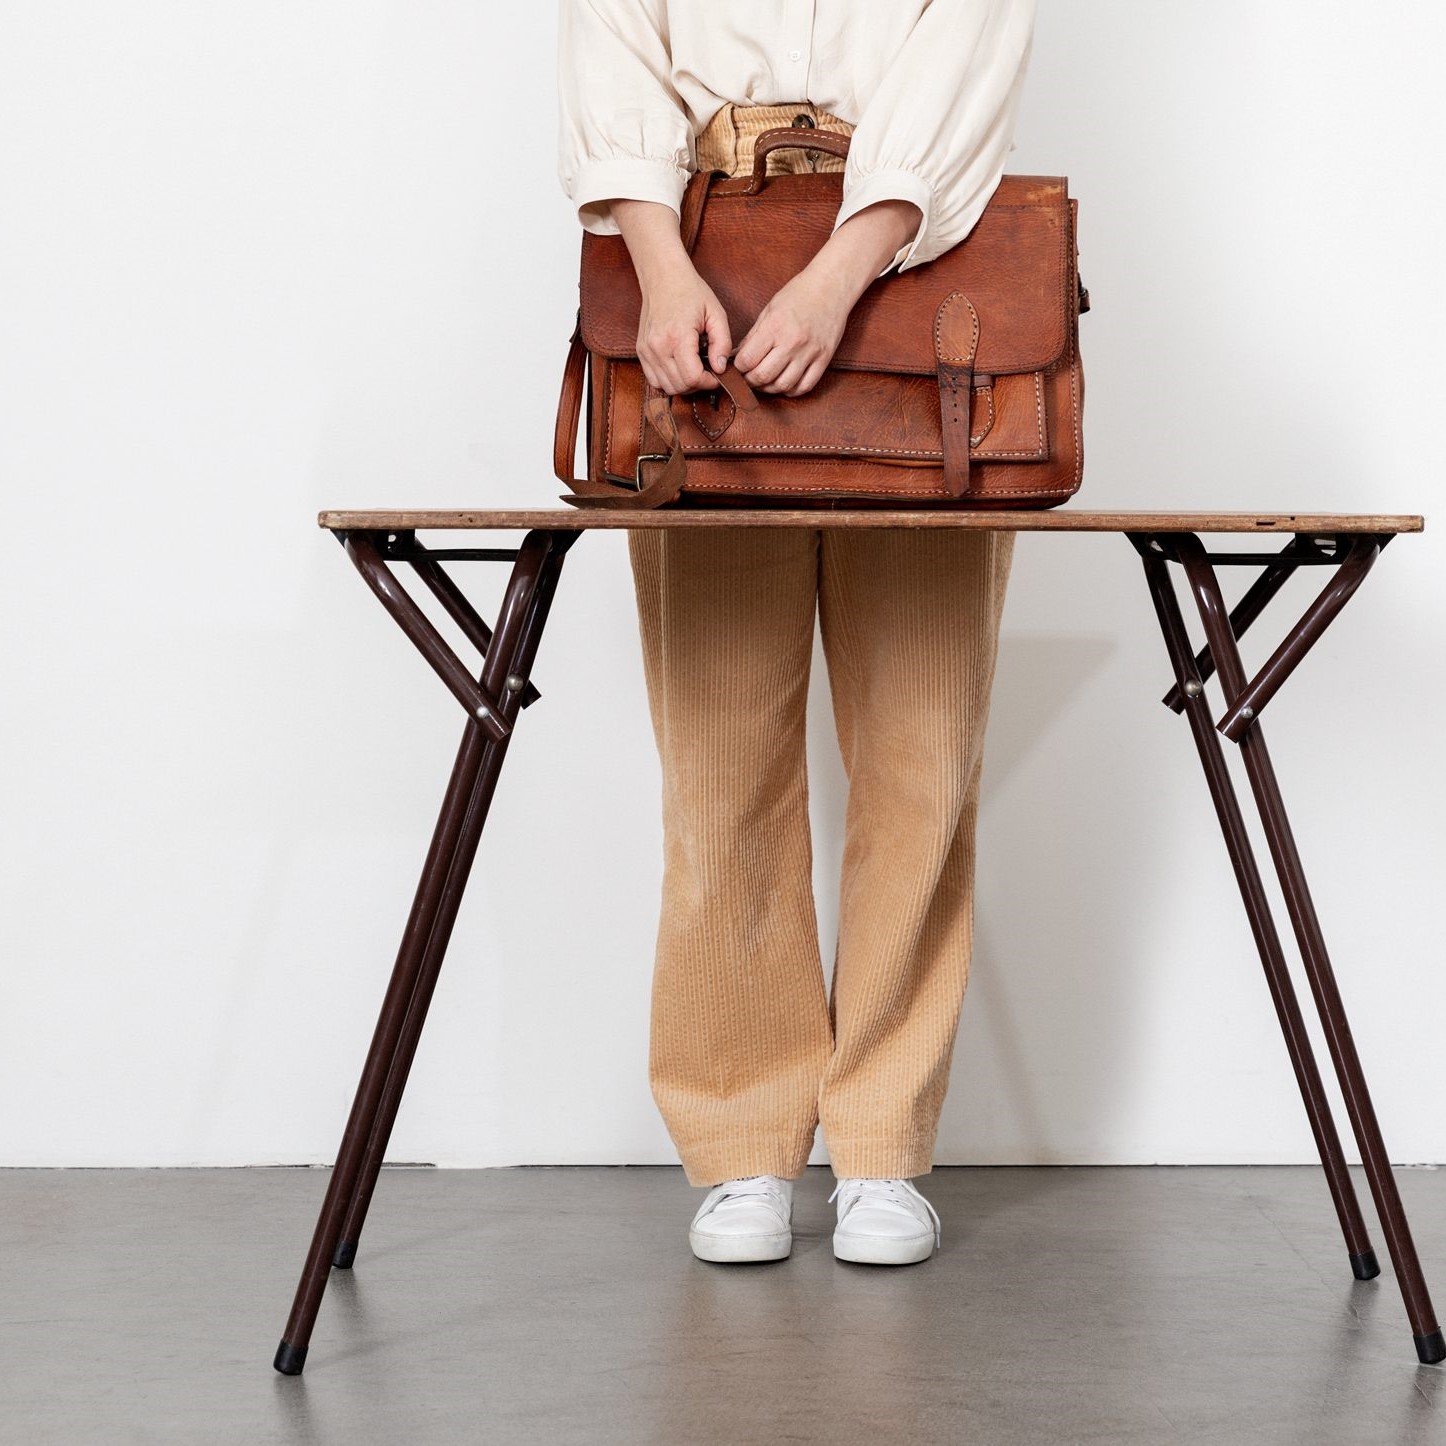 Table with a person and bag